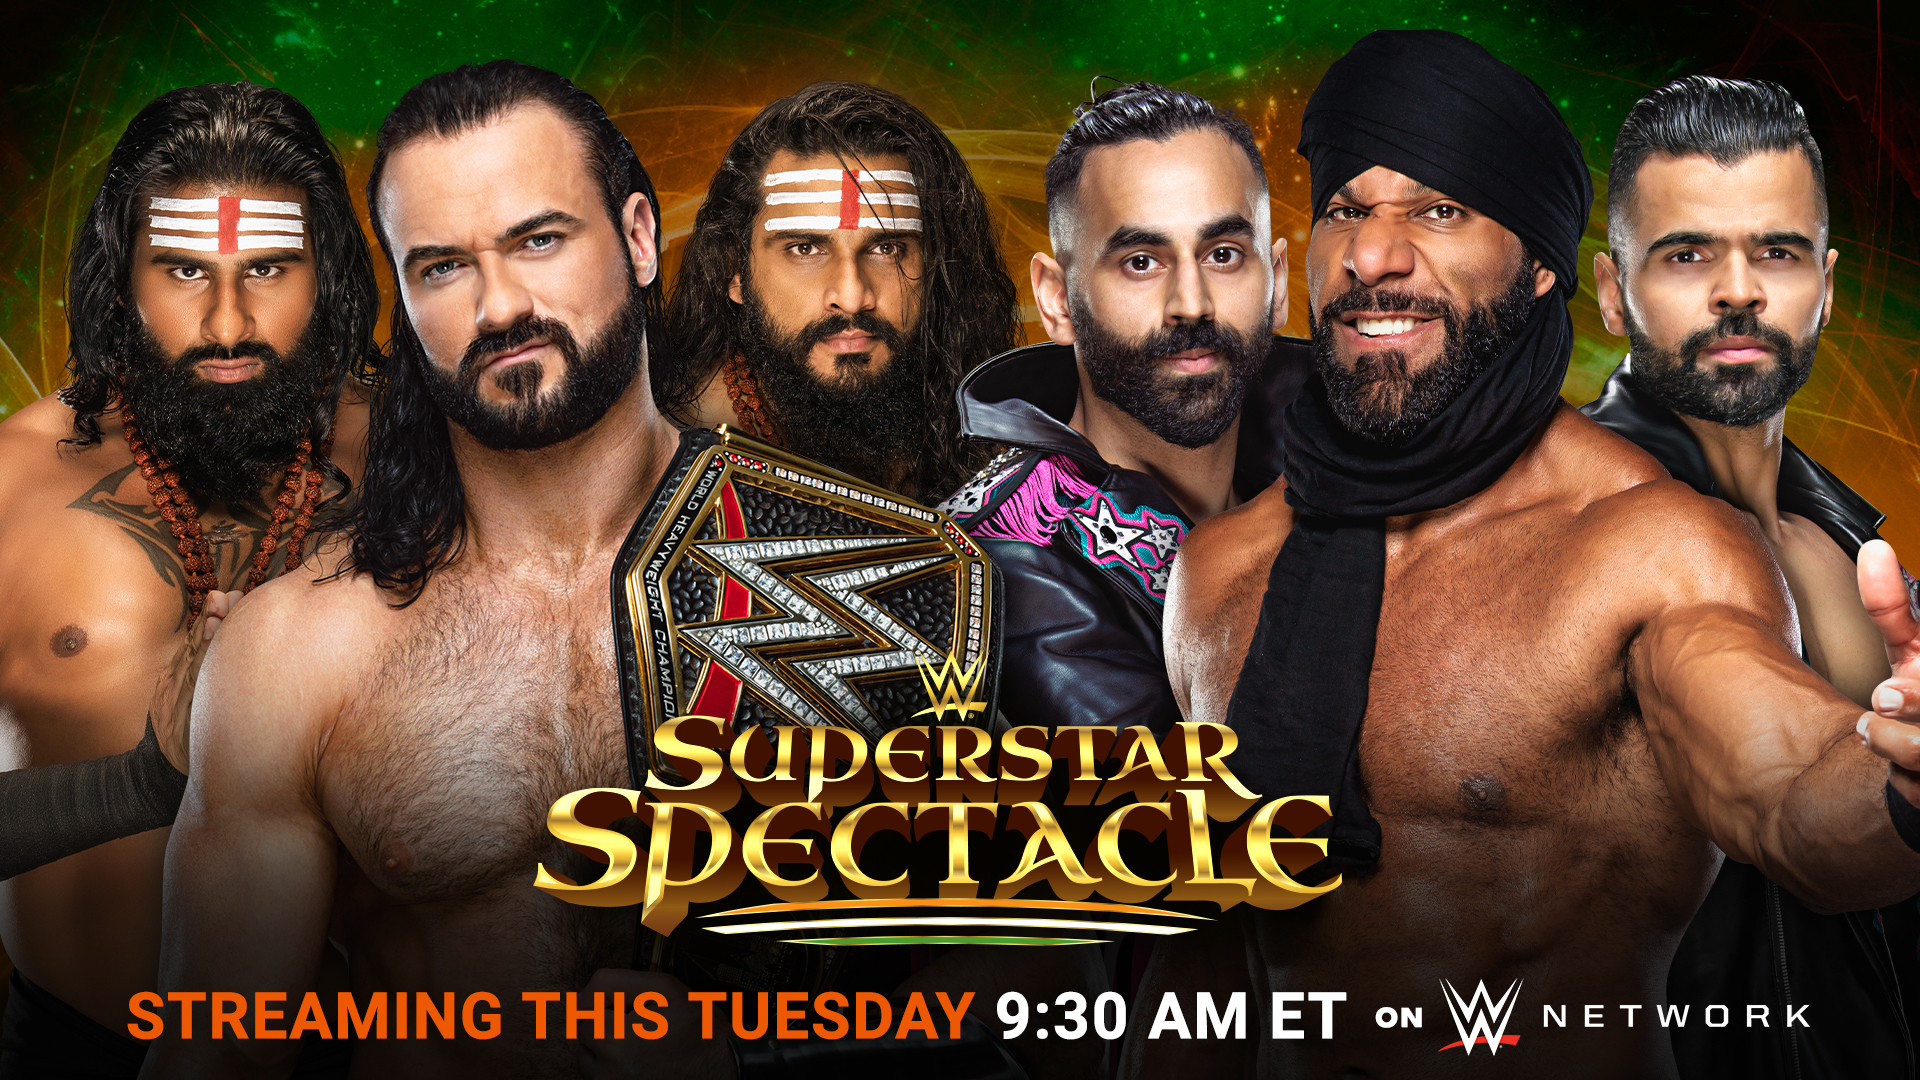 Wwe Superstar Spectacle 21 Results Winners Grades Reaction And Highlights Bleacher Report Latest News Videos And Highlights